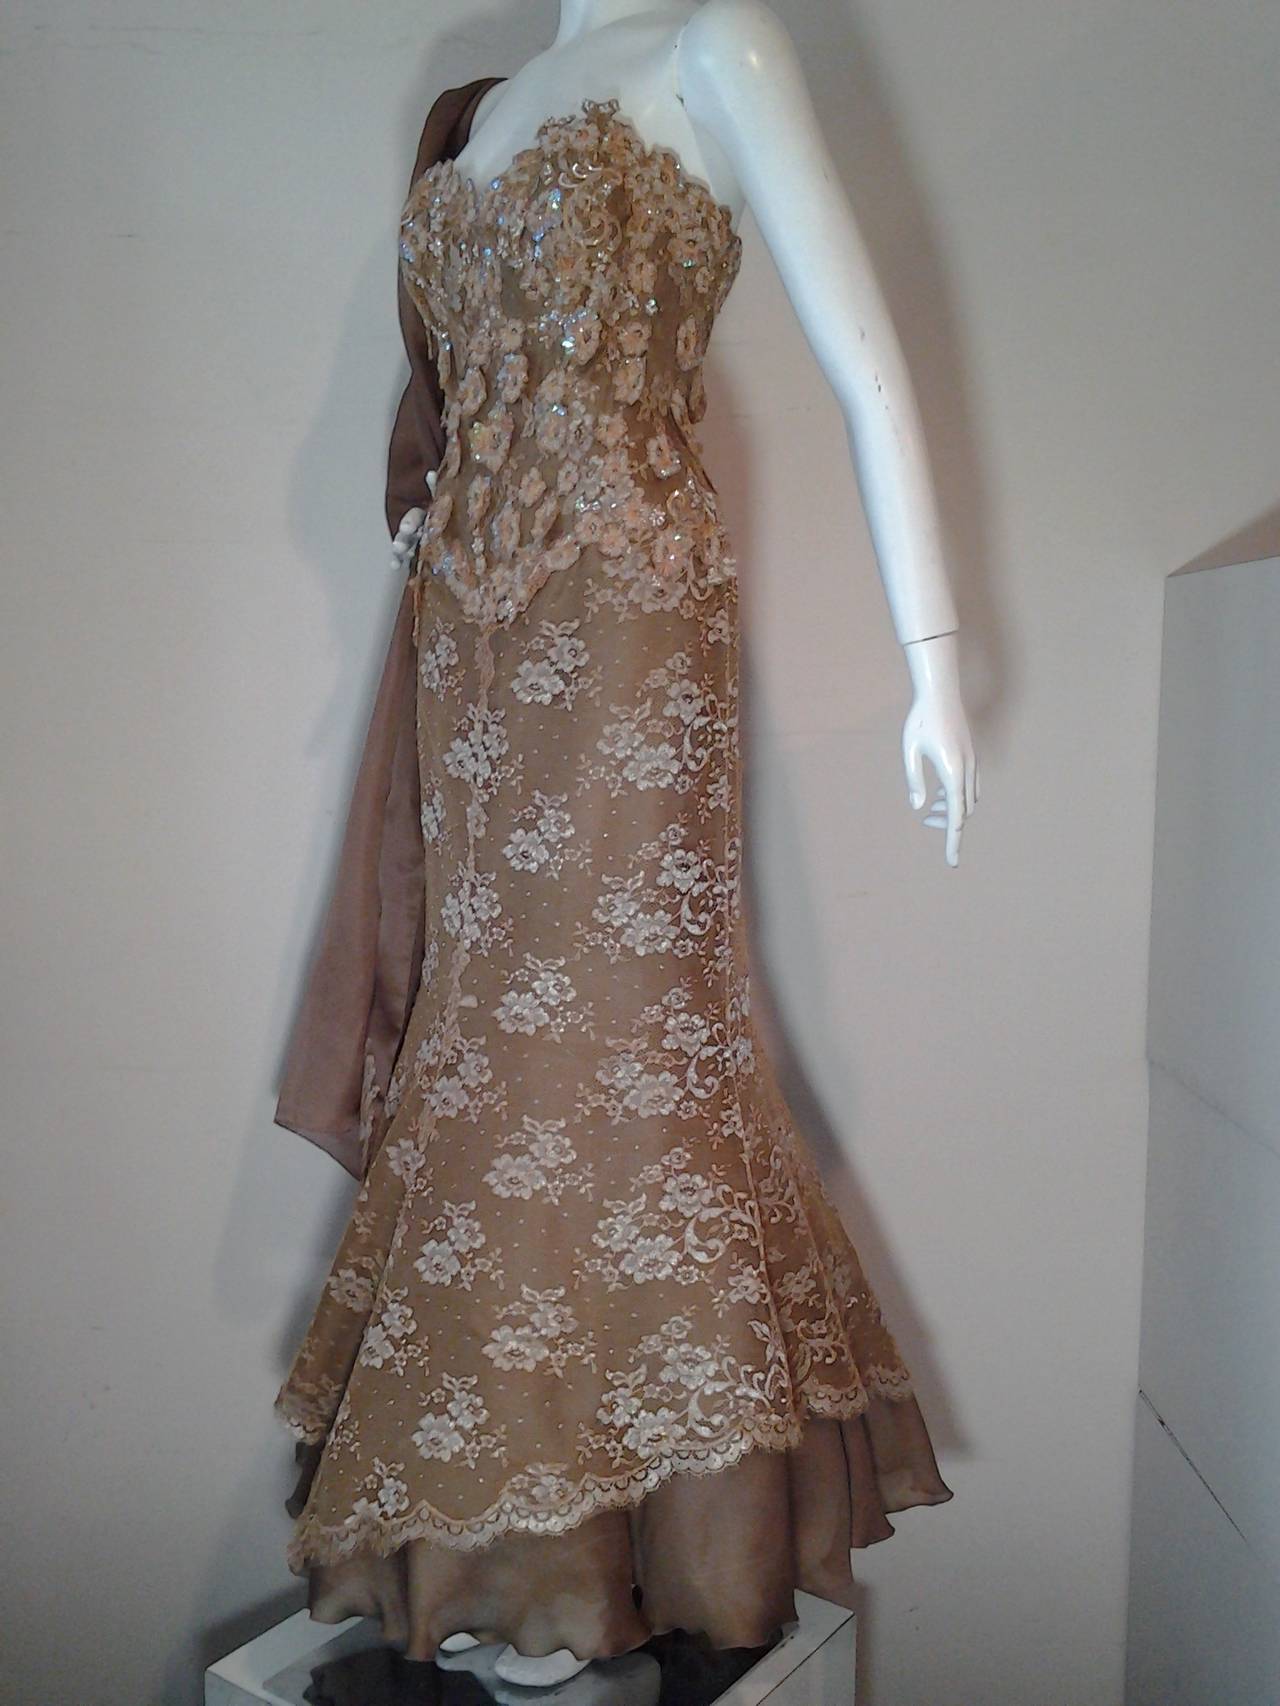 Women's 1980s Vicky Tiel Couture Cappuccino Lace Gown w/ Sequin Applique